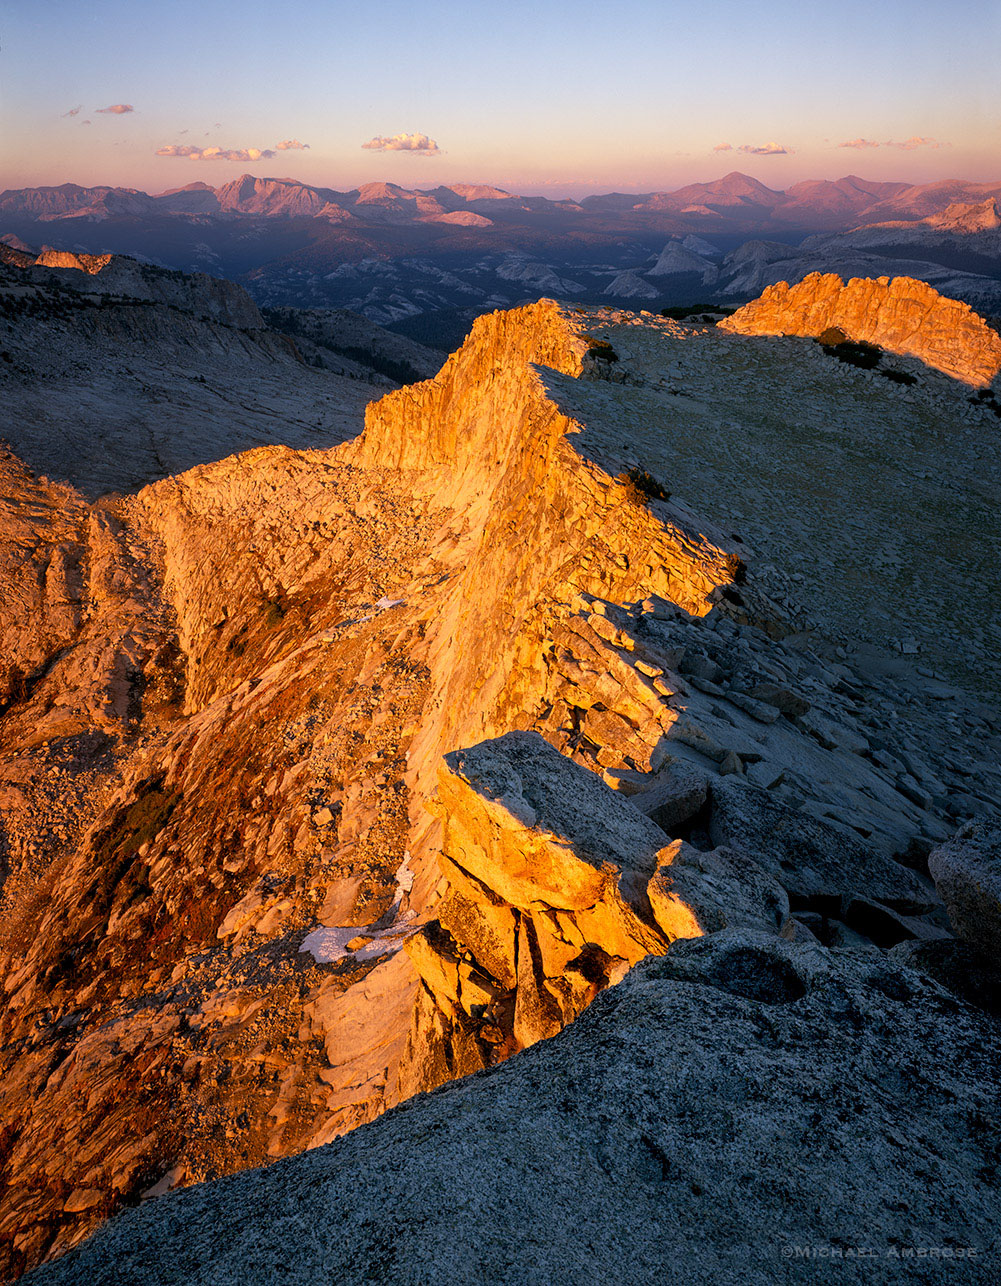 Mt. Hoffman ridge divided by sunset light in Yosemite National Park.